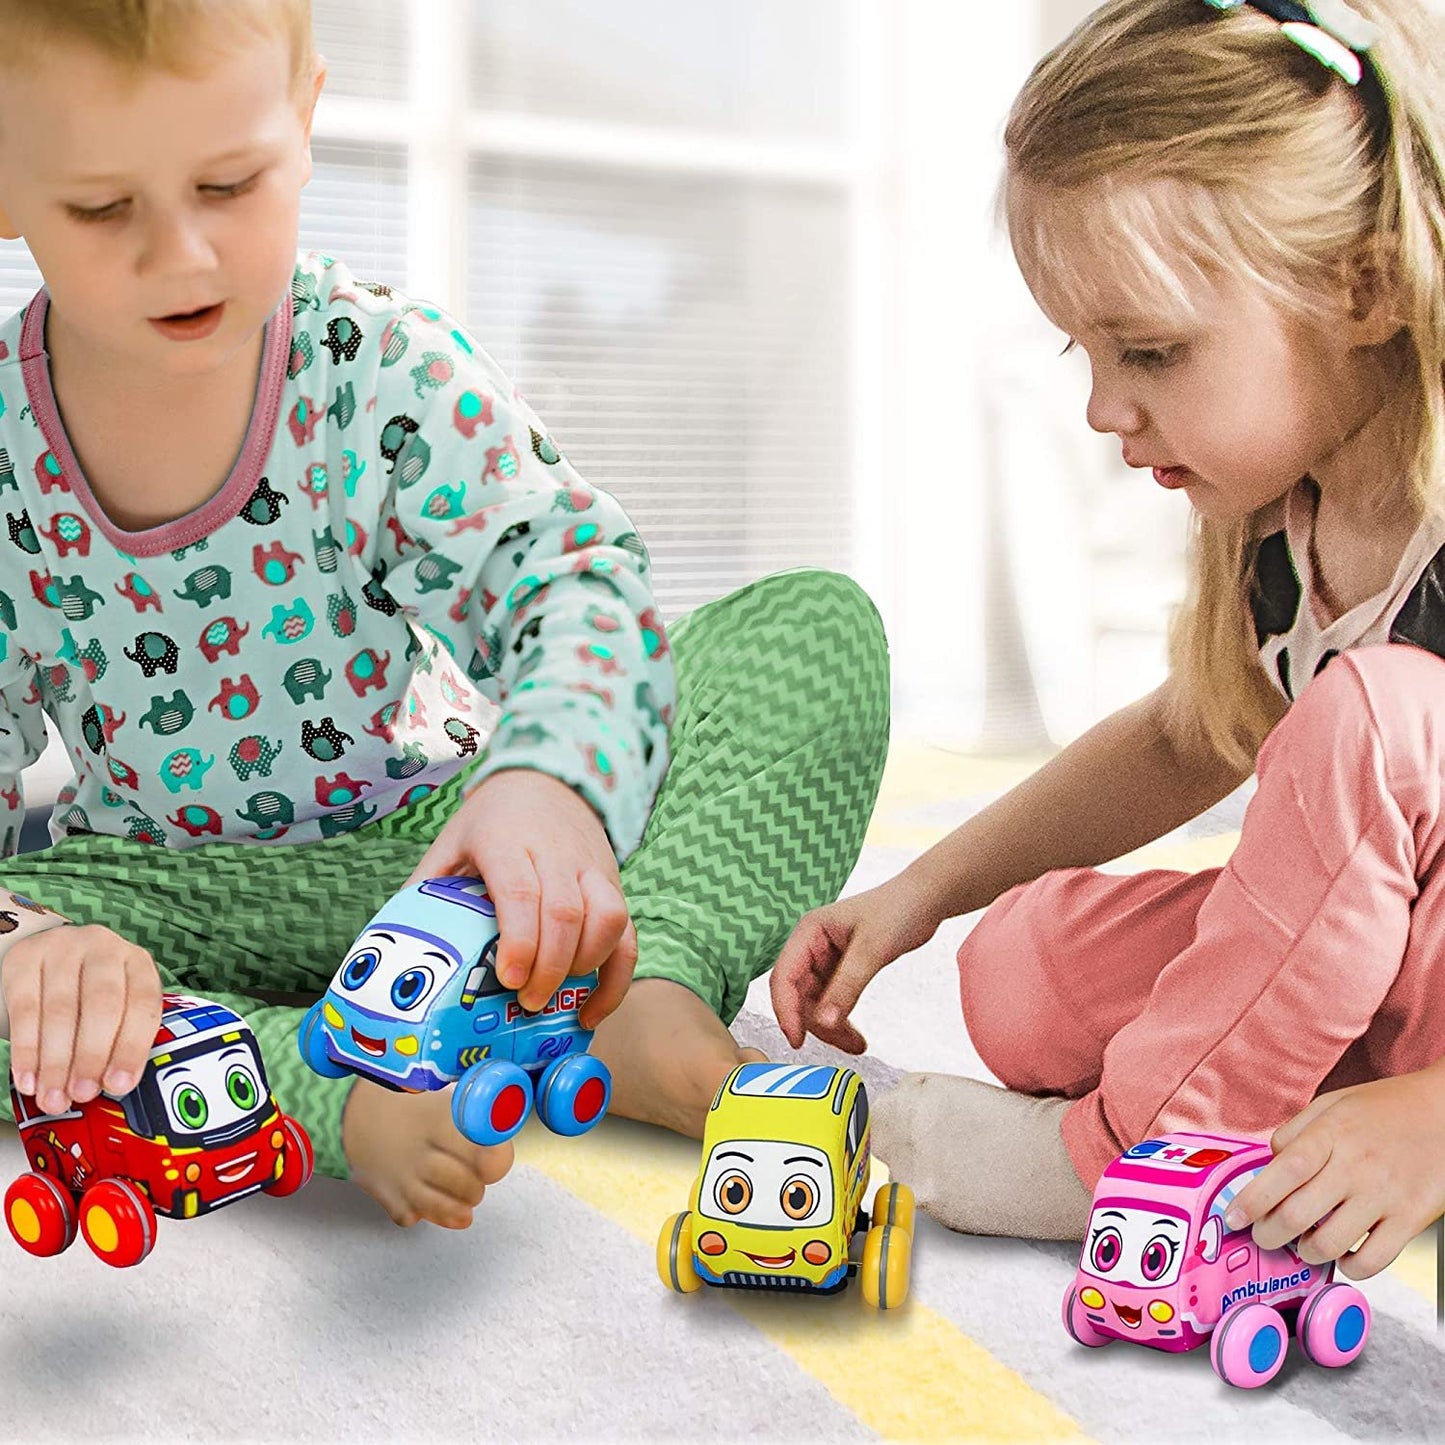 ArtCreativity Pullback Plush Car Set, Set of 4, Soft-Sided Stuffed Cars with Pullback Mechanism, Cute and Colorful for Babies and Toddlers, Best Birthday Gift for Little Boys and Girls